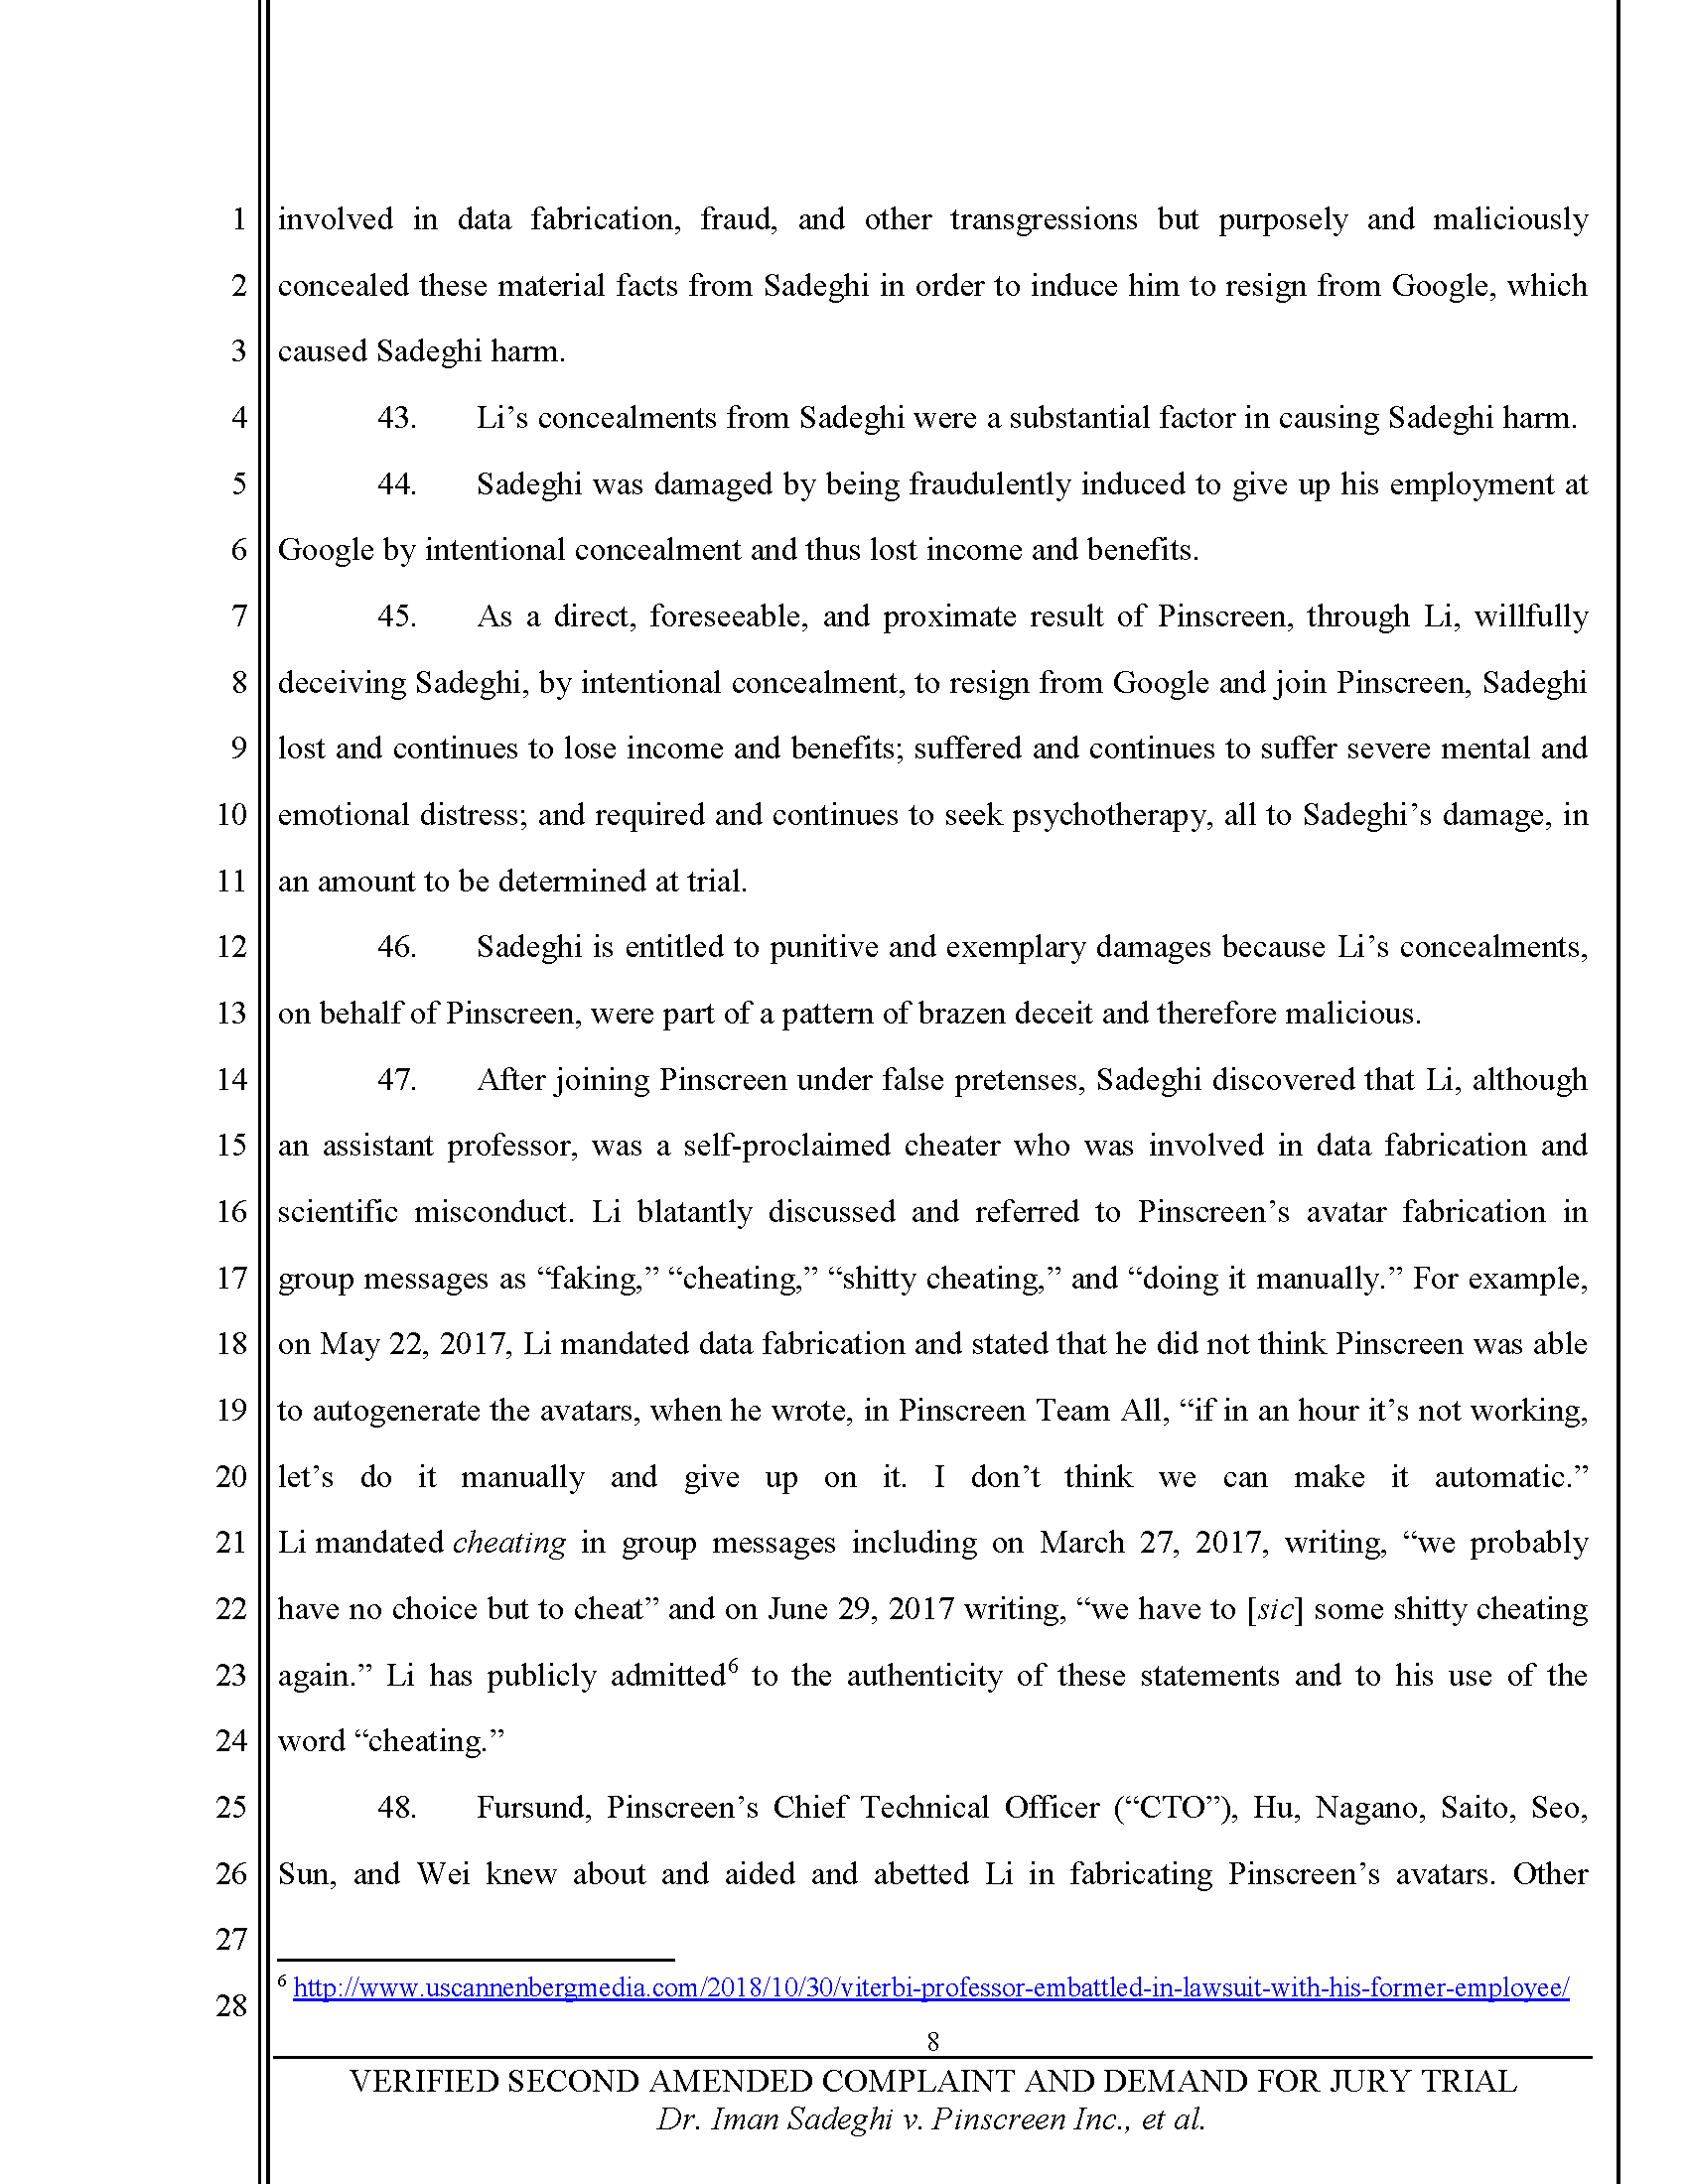 Second Amended Complaint (SAC) Page 9